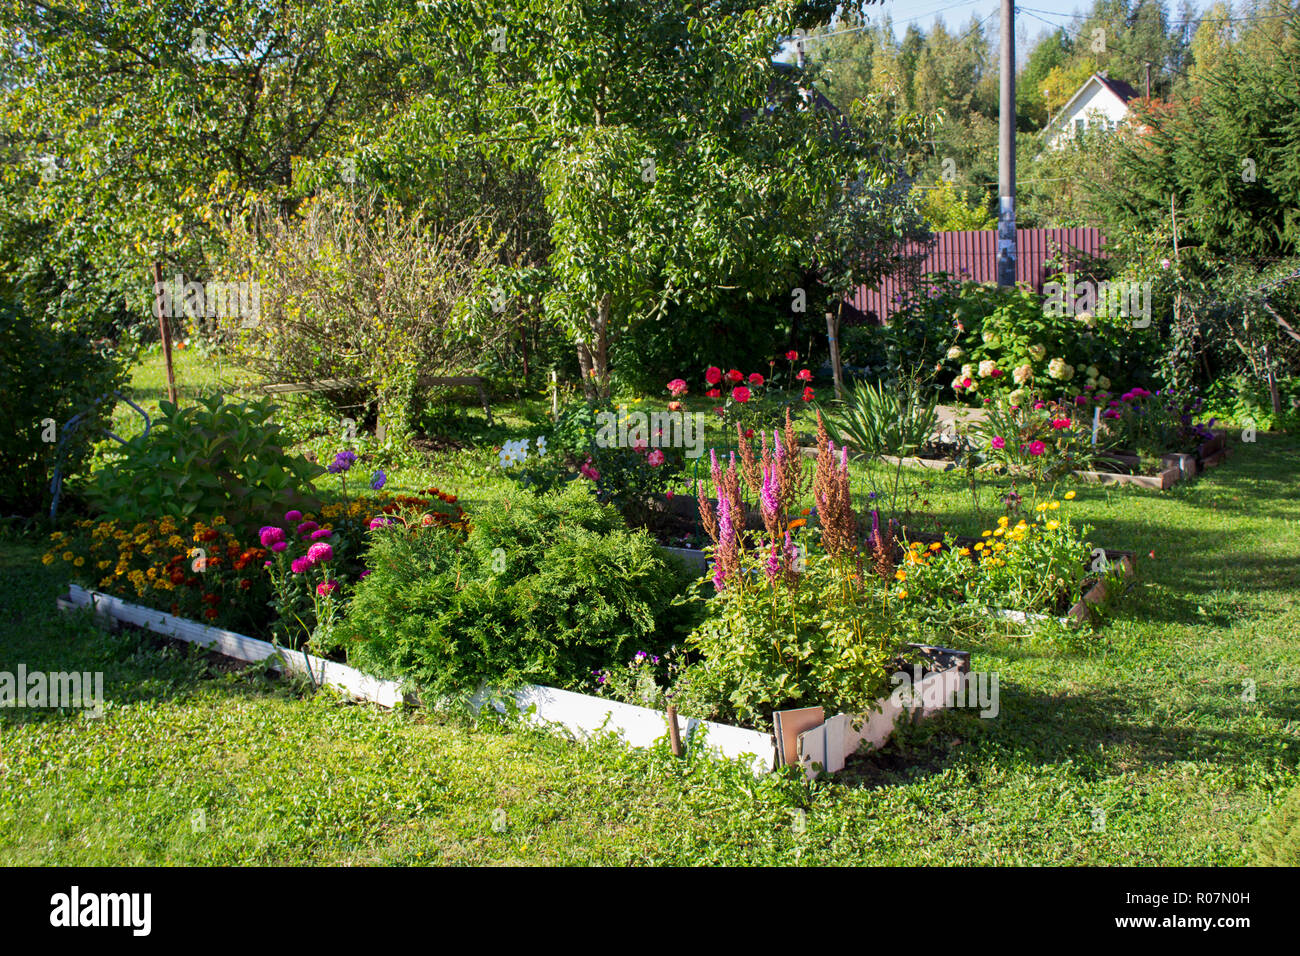 scenery of modest landscaping area of grass and flowers in the